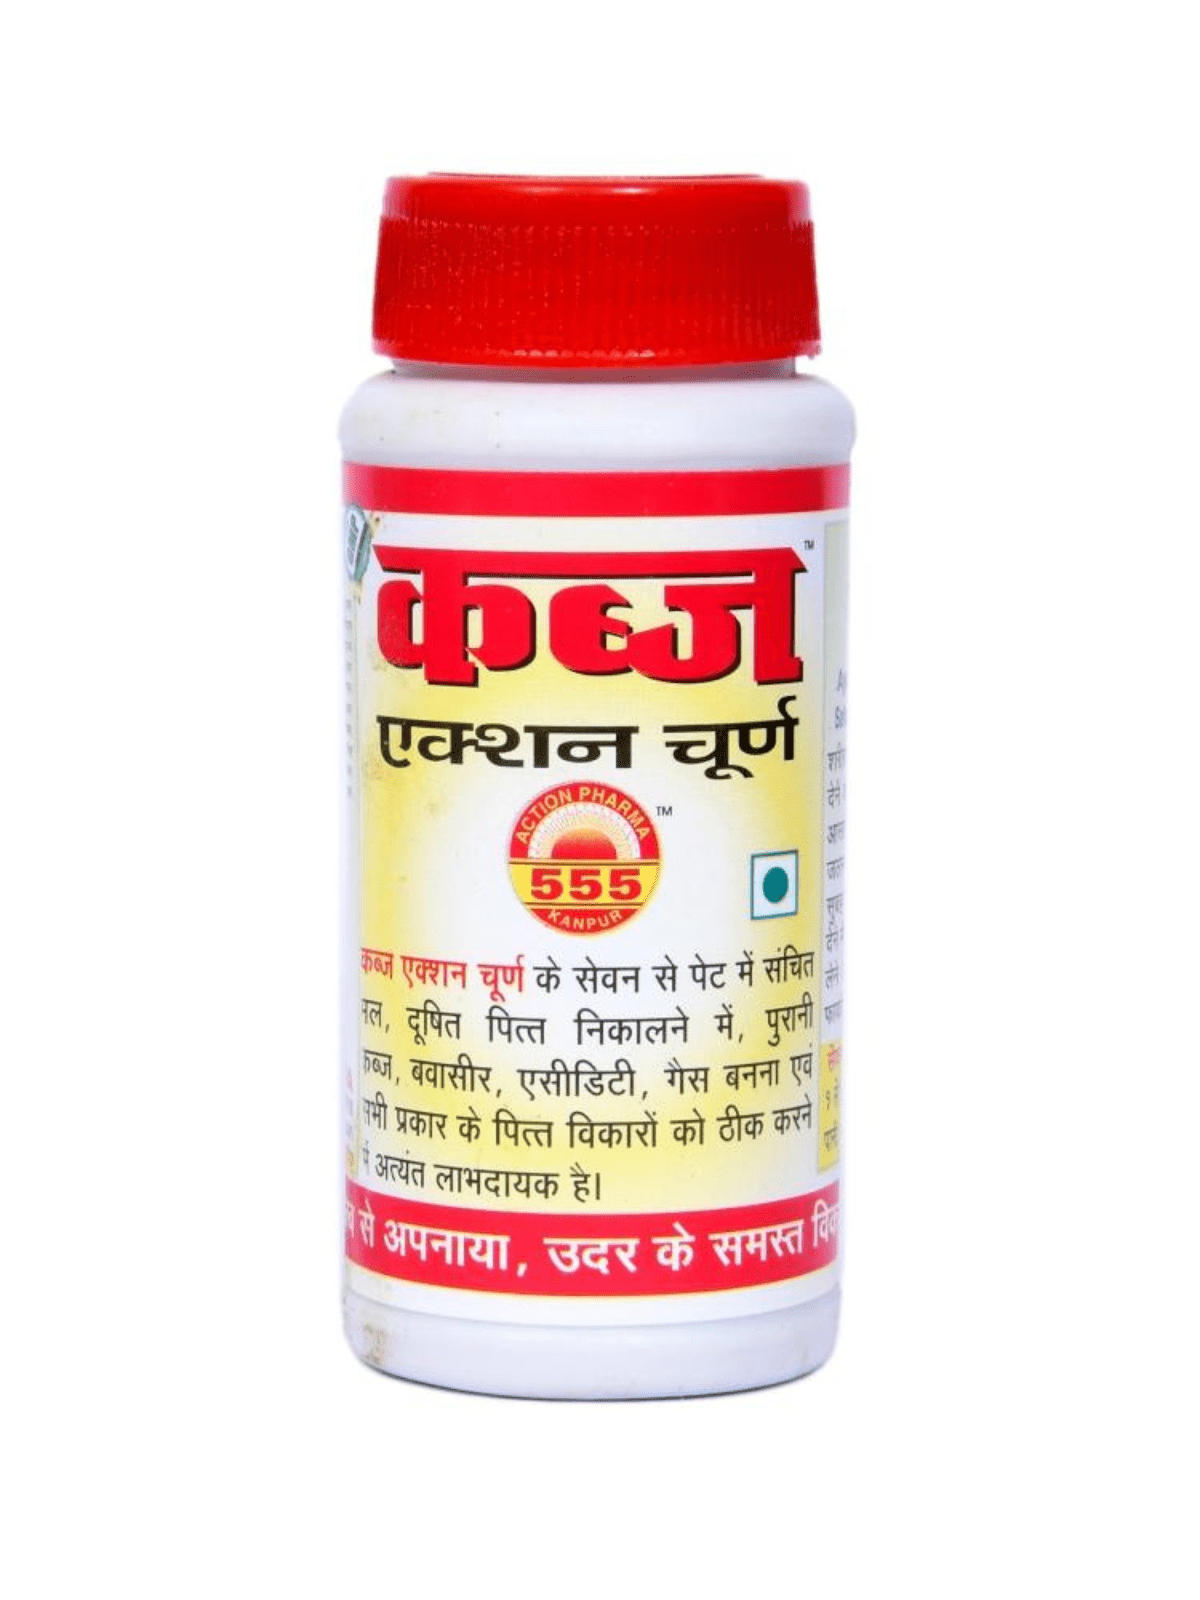 Kabj Action Churna, Constipation Relief Herbal Powder, Digestive Health Supplement, Natural Laxative Powder, Ayurvedic Remedy for Constipation, Herbal Digestive Aid, Gastrointestinal Health Product, Bowel Movement Support, Ayurvedic Constipation Treatment, Herbal Colon Cleanse